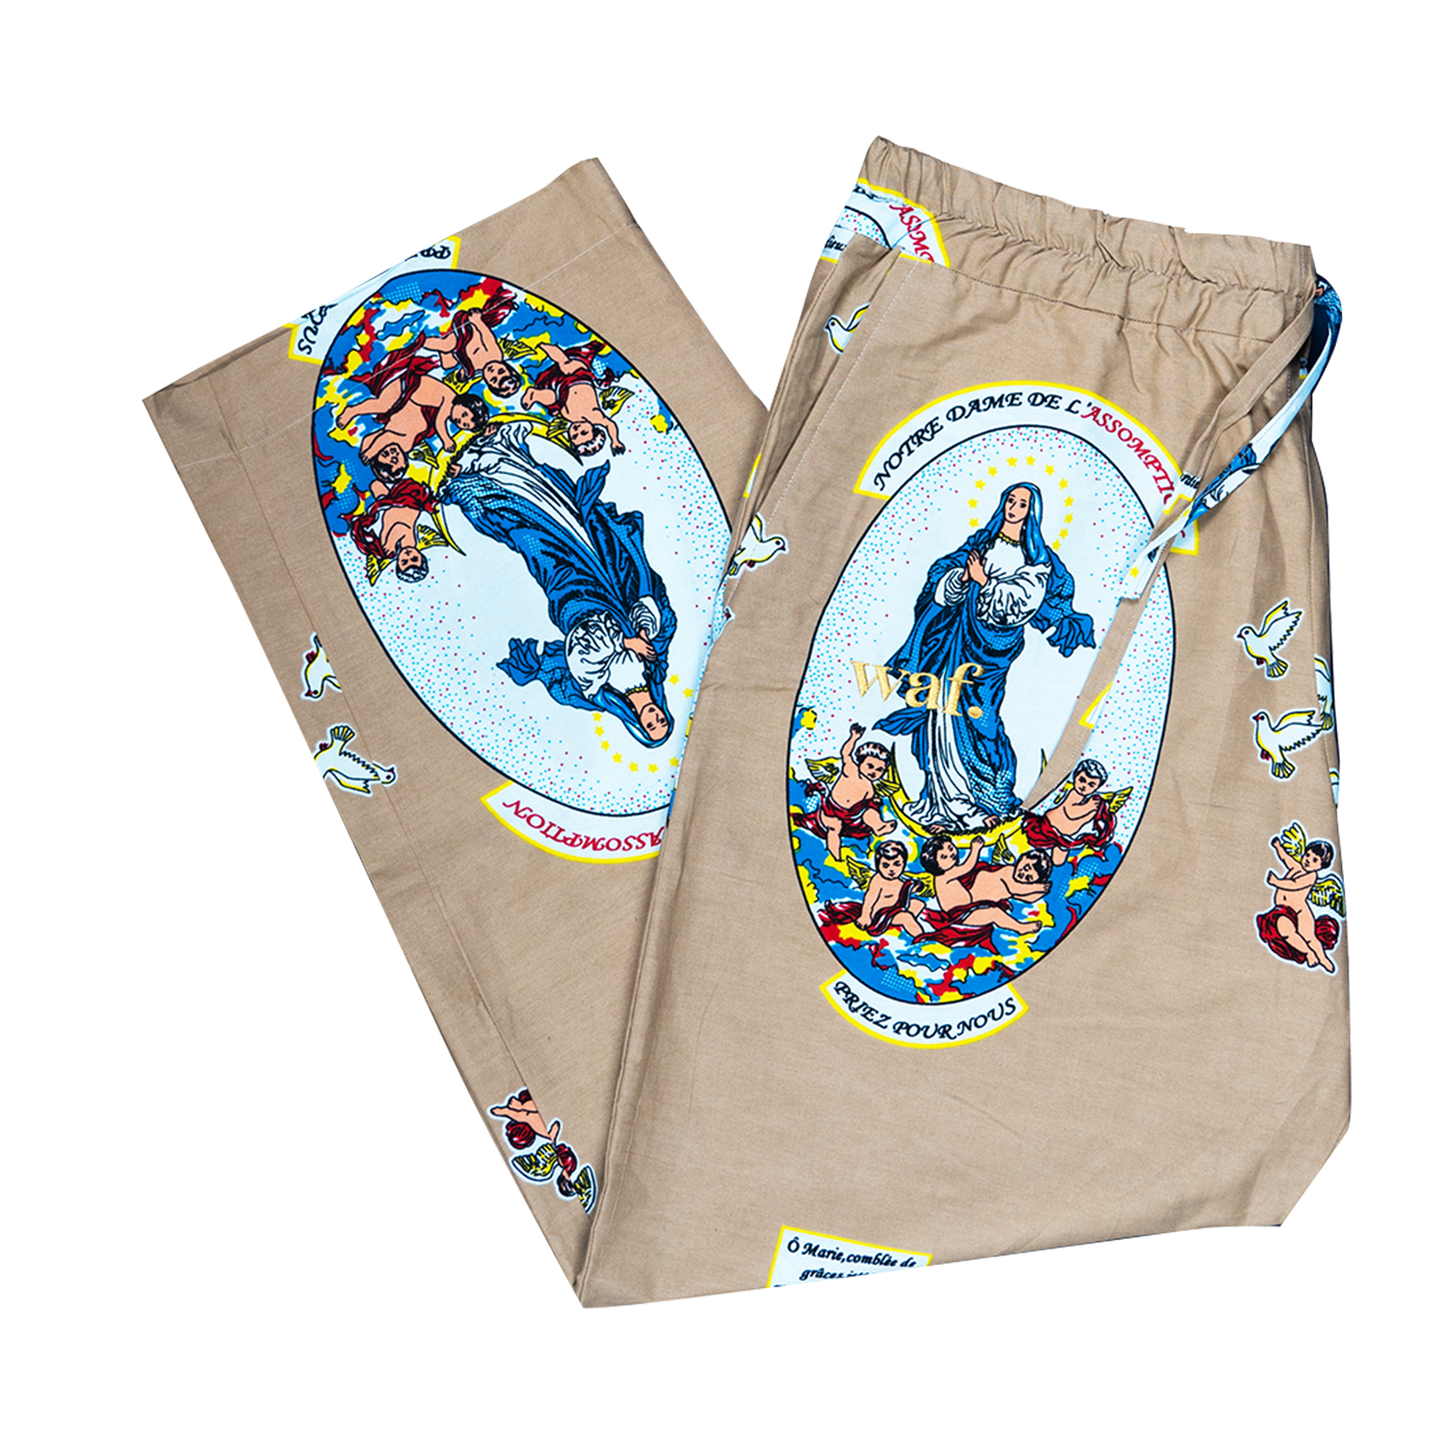 Notre dame Trousers